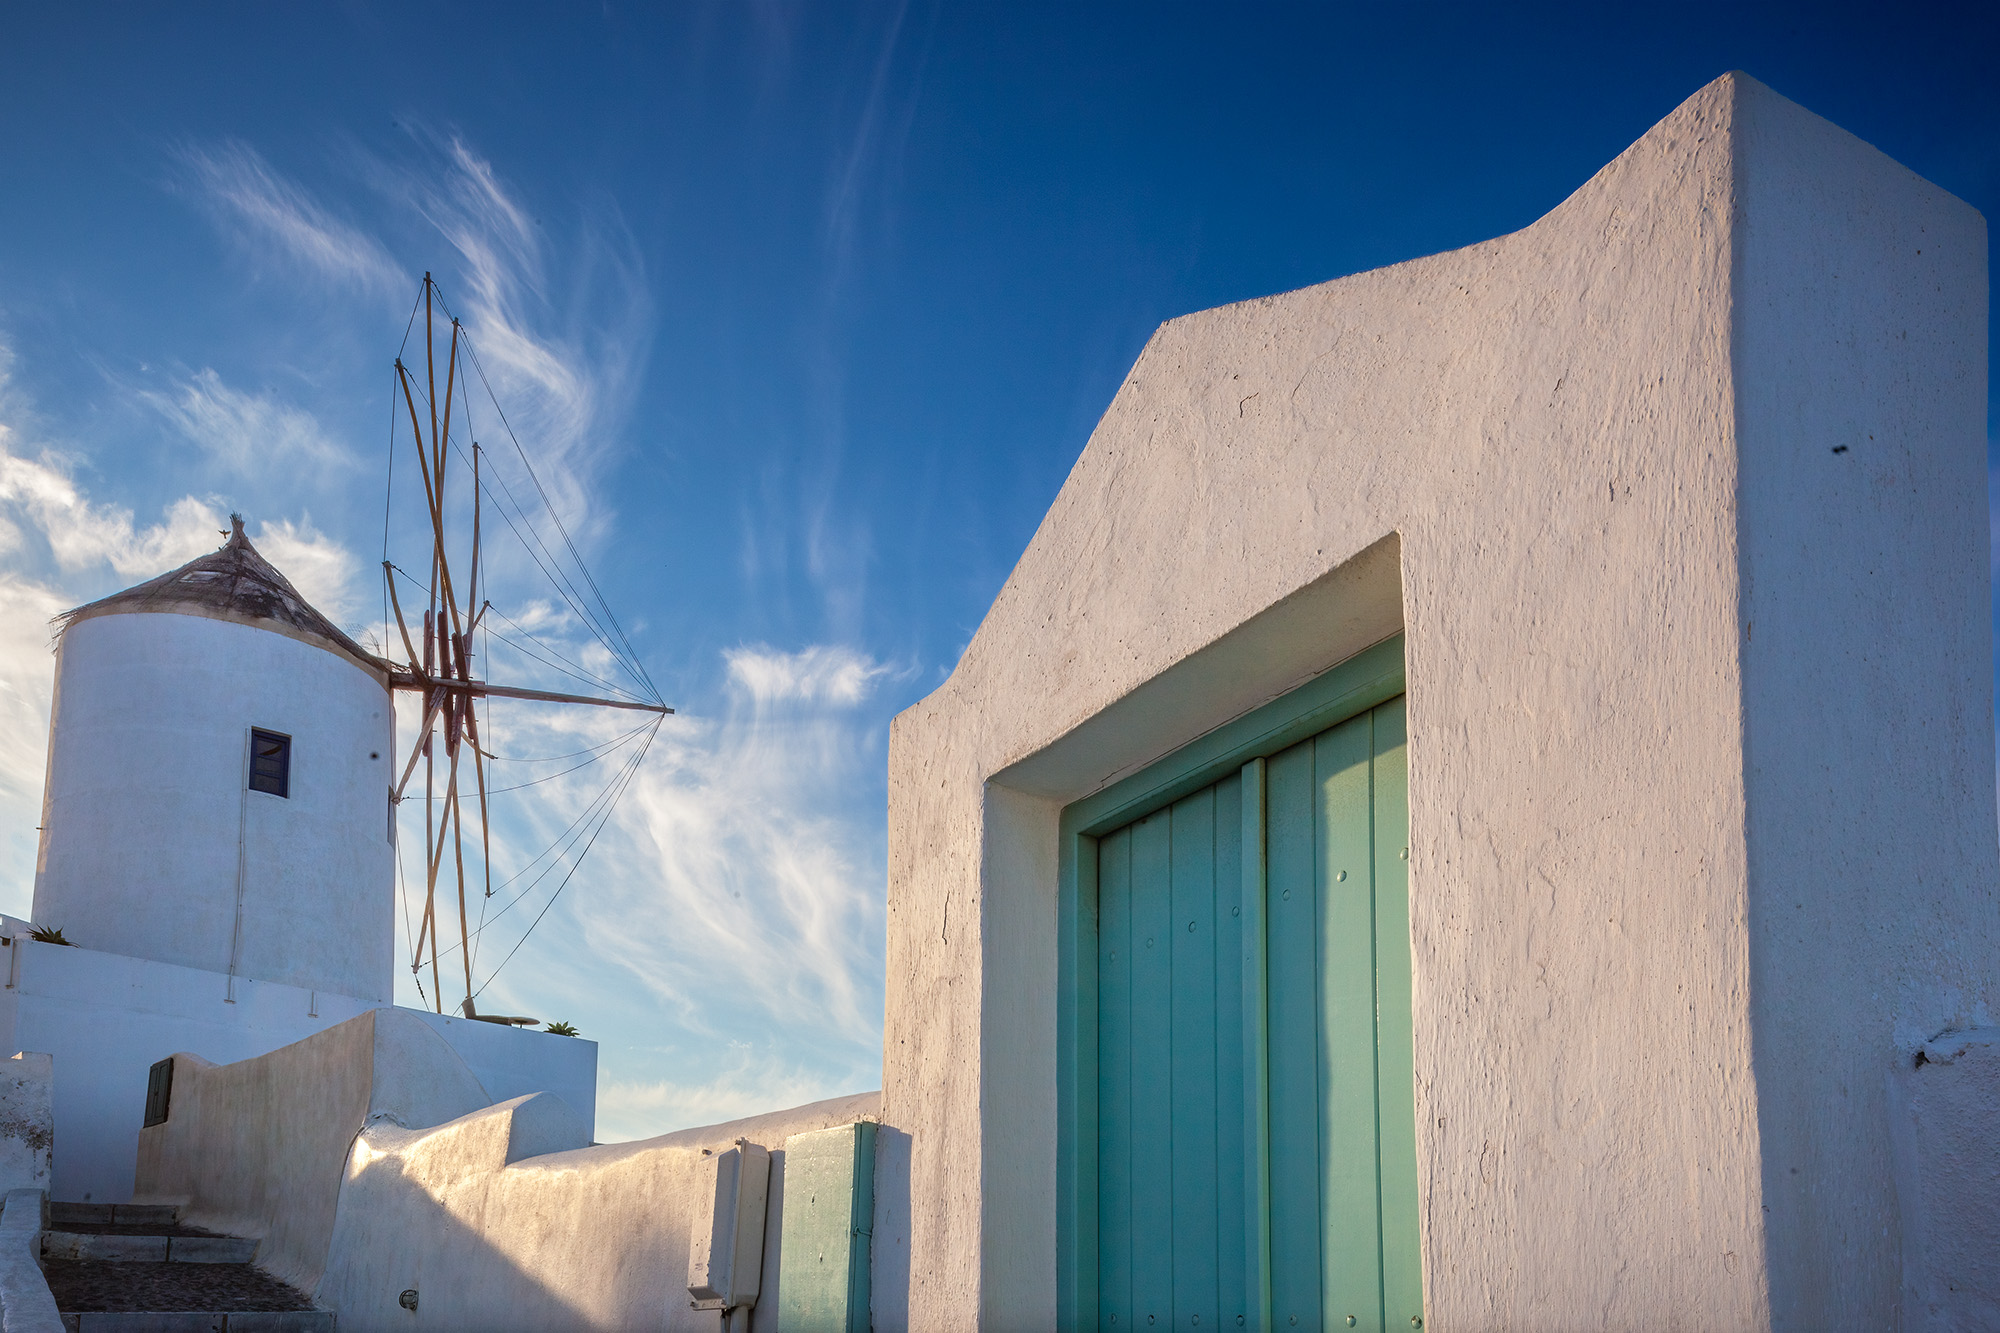 In Oia, Santorini, Greece, I embarked on a tranquil morning stroll, and this image encapsulates the charm of that moment. A rustic...